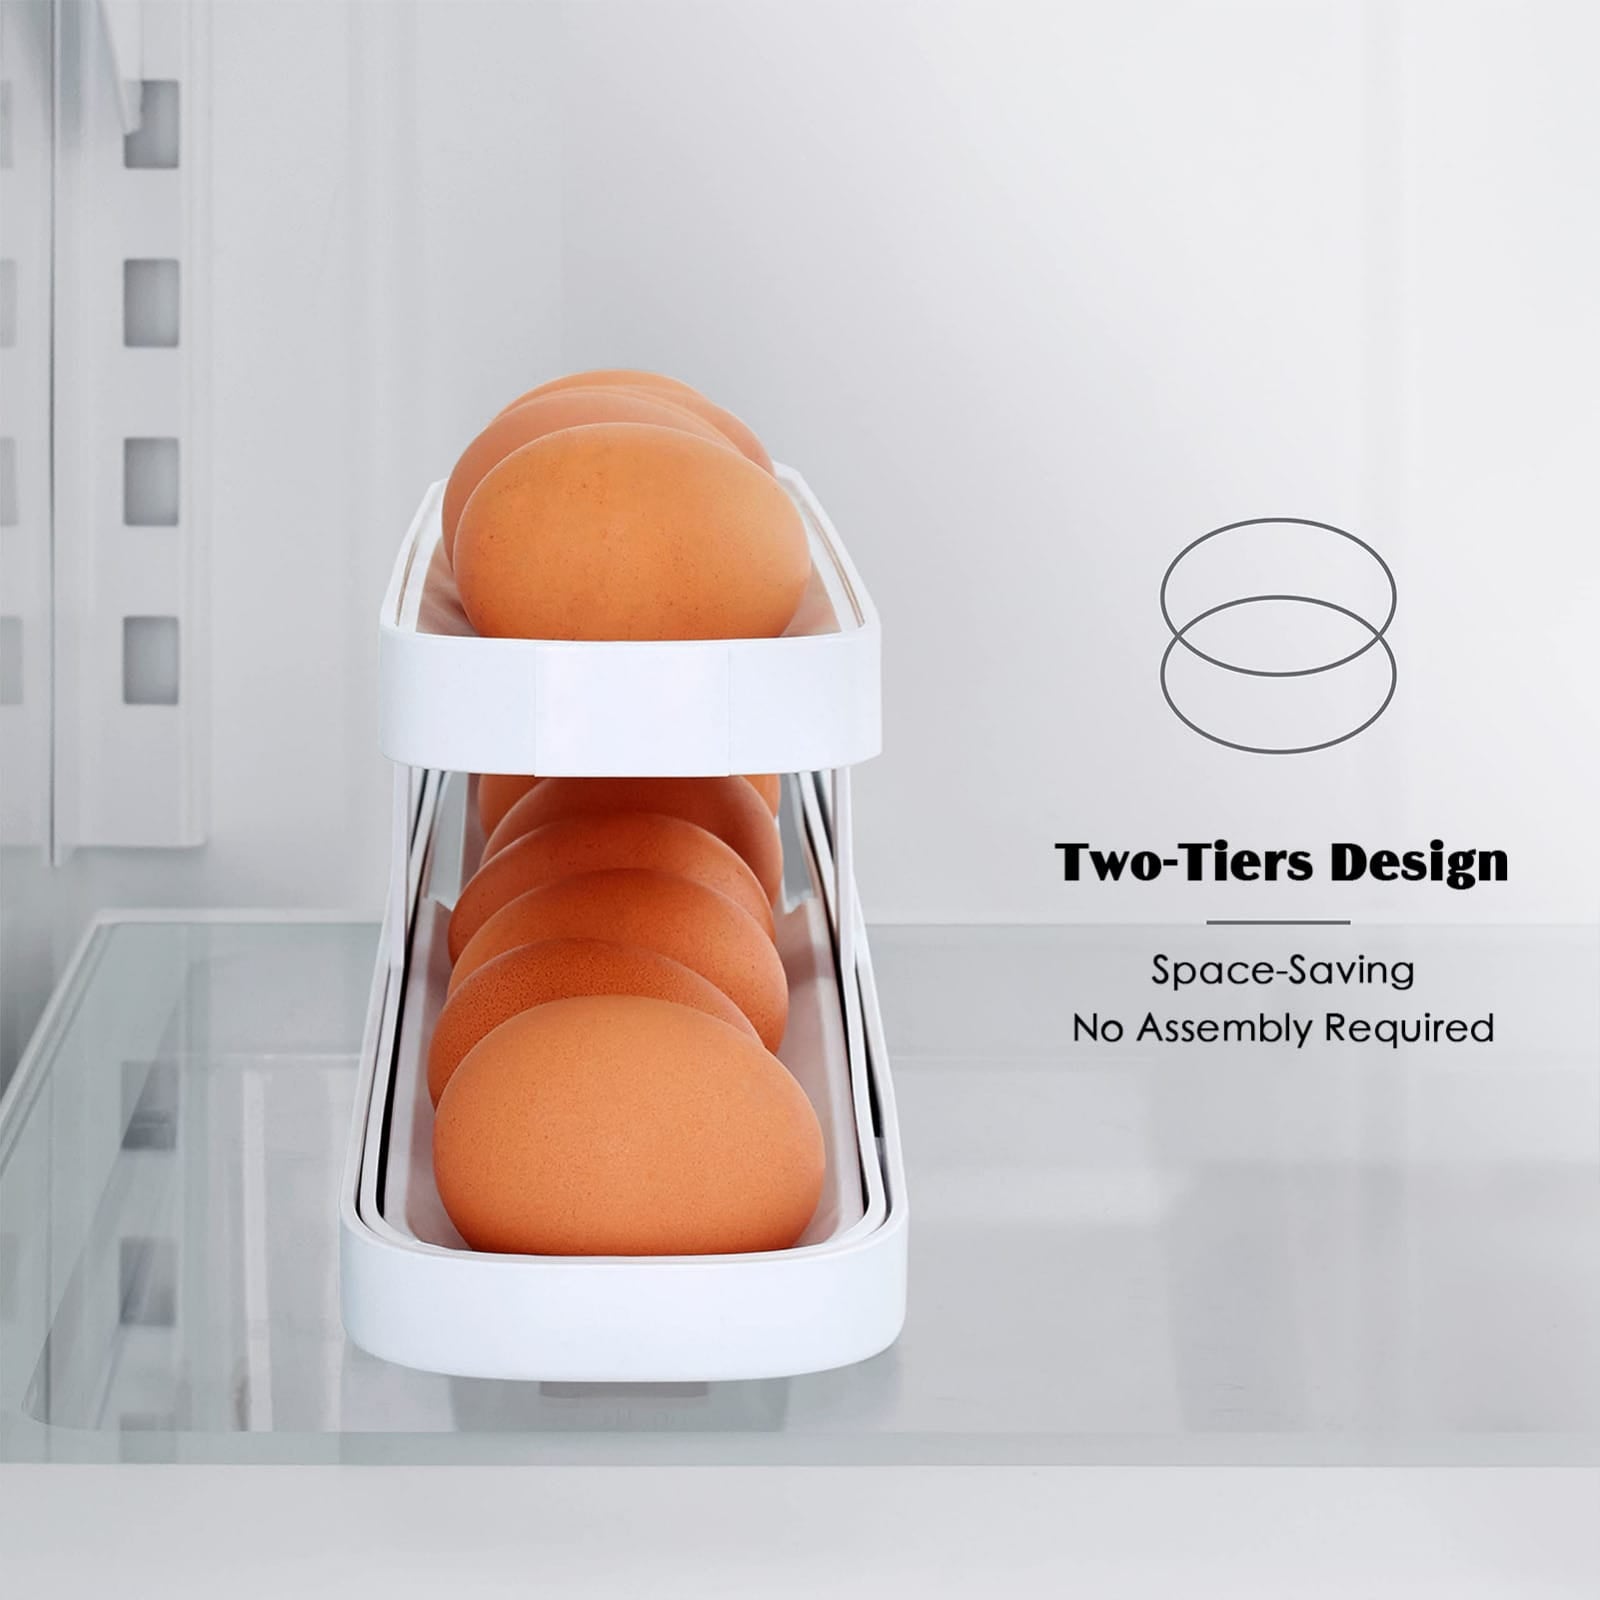 Two Tier Design of Egg Storage Container.